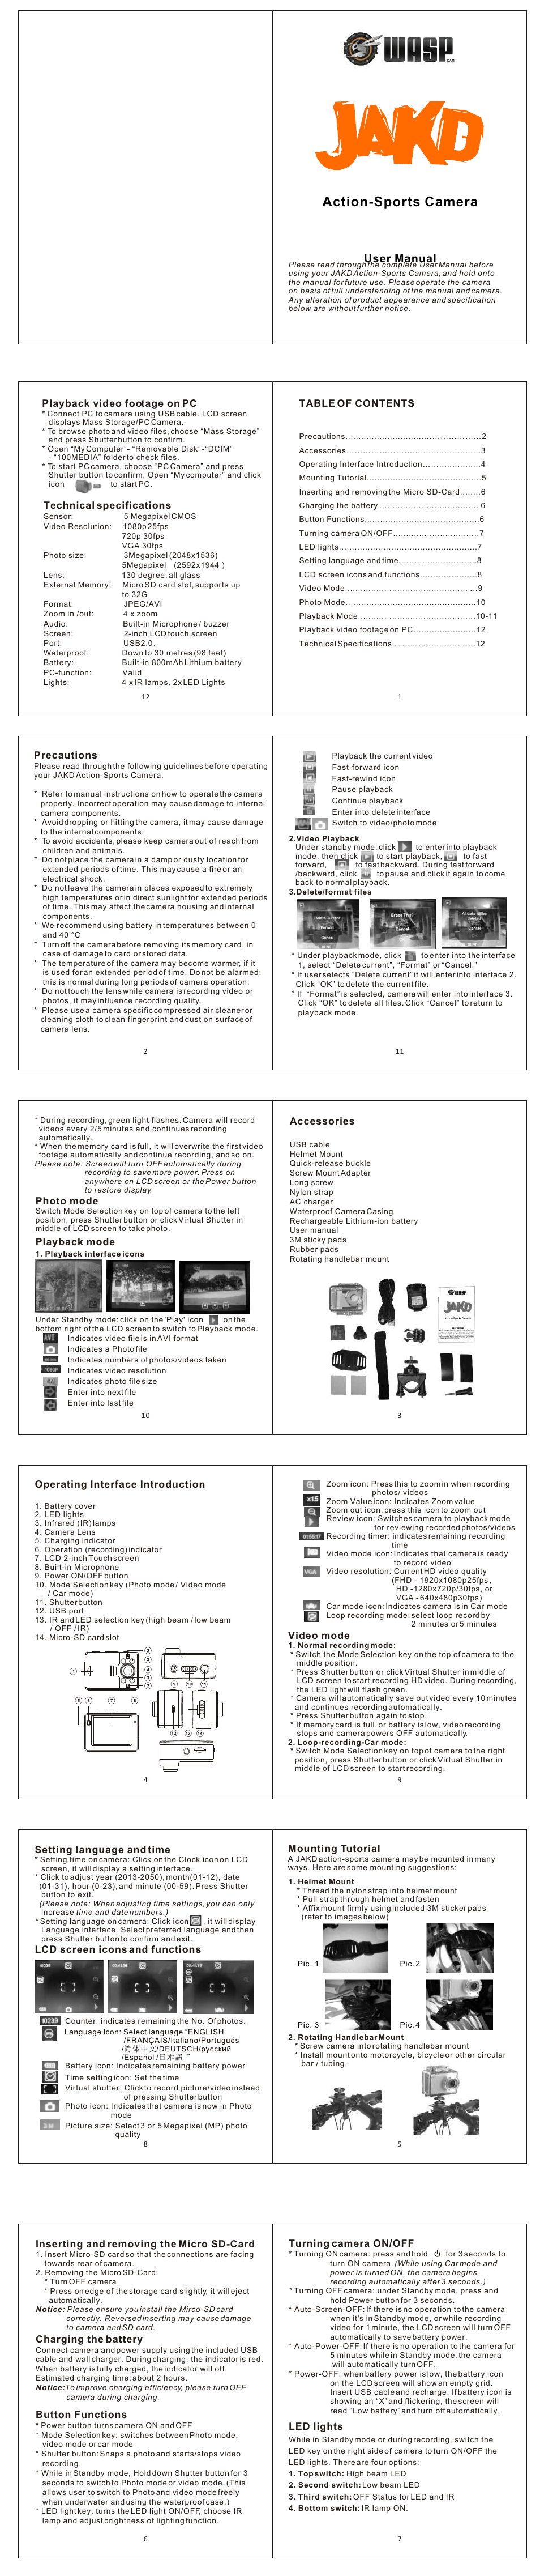 WASPcam JAKD Action-Sports Camera User Manual | 1 page